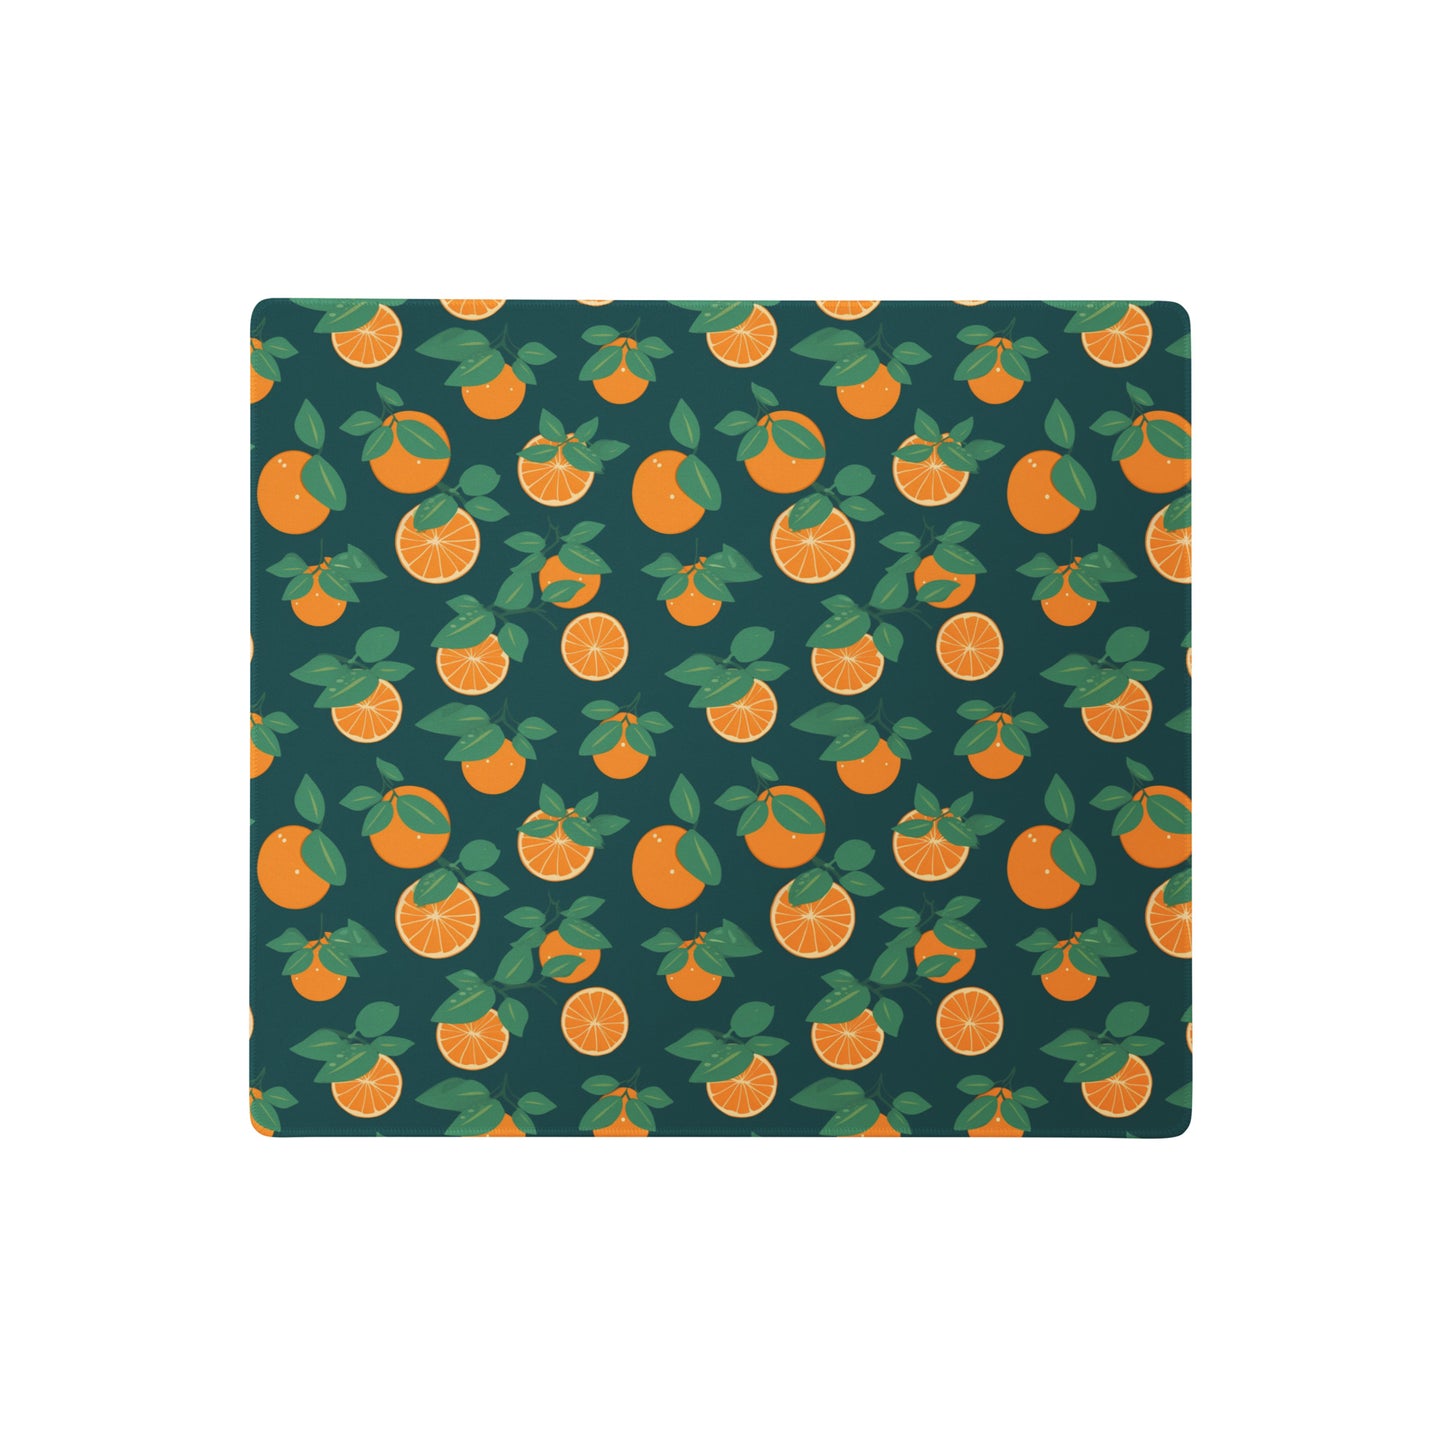 A 18" x 16" desk pad with oranges all over it. Orange and Blue in color.